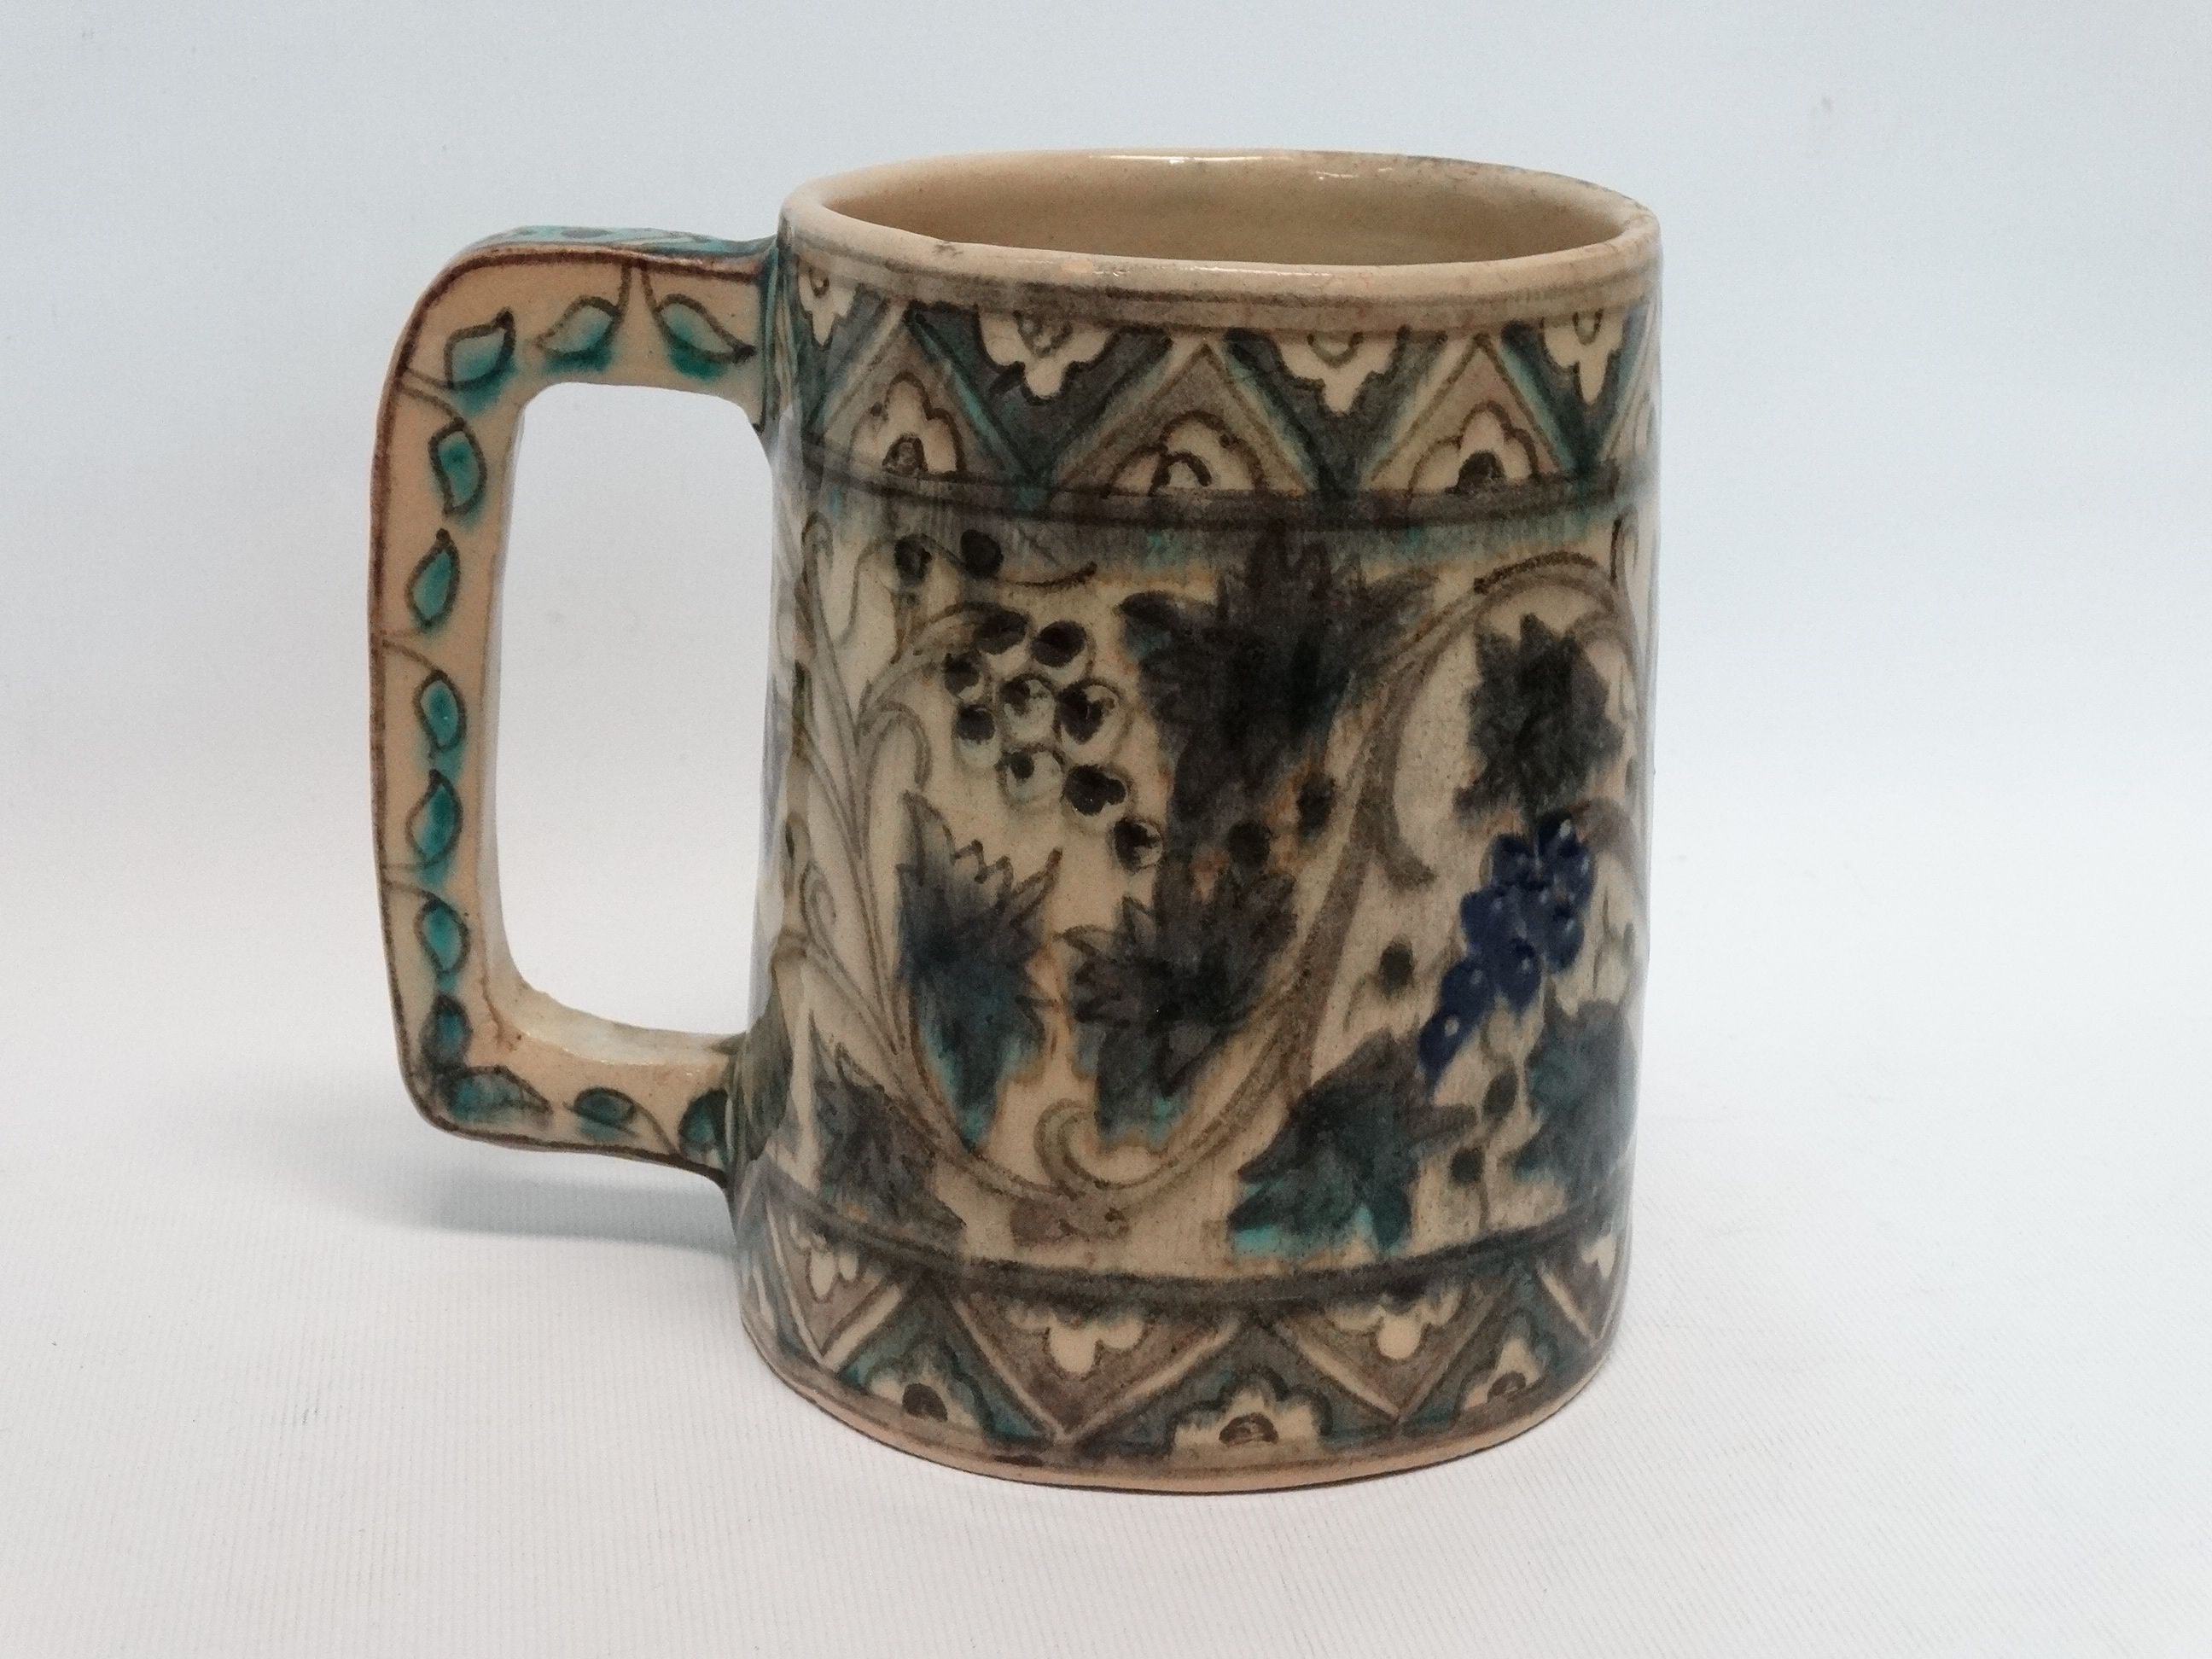 An Iznic glazed mug - decorated with vines within a geometric border, height 15cm.